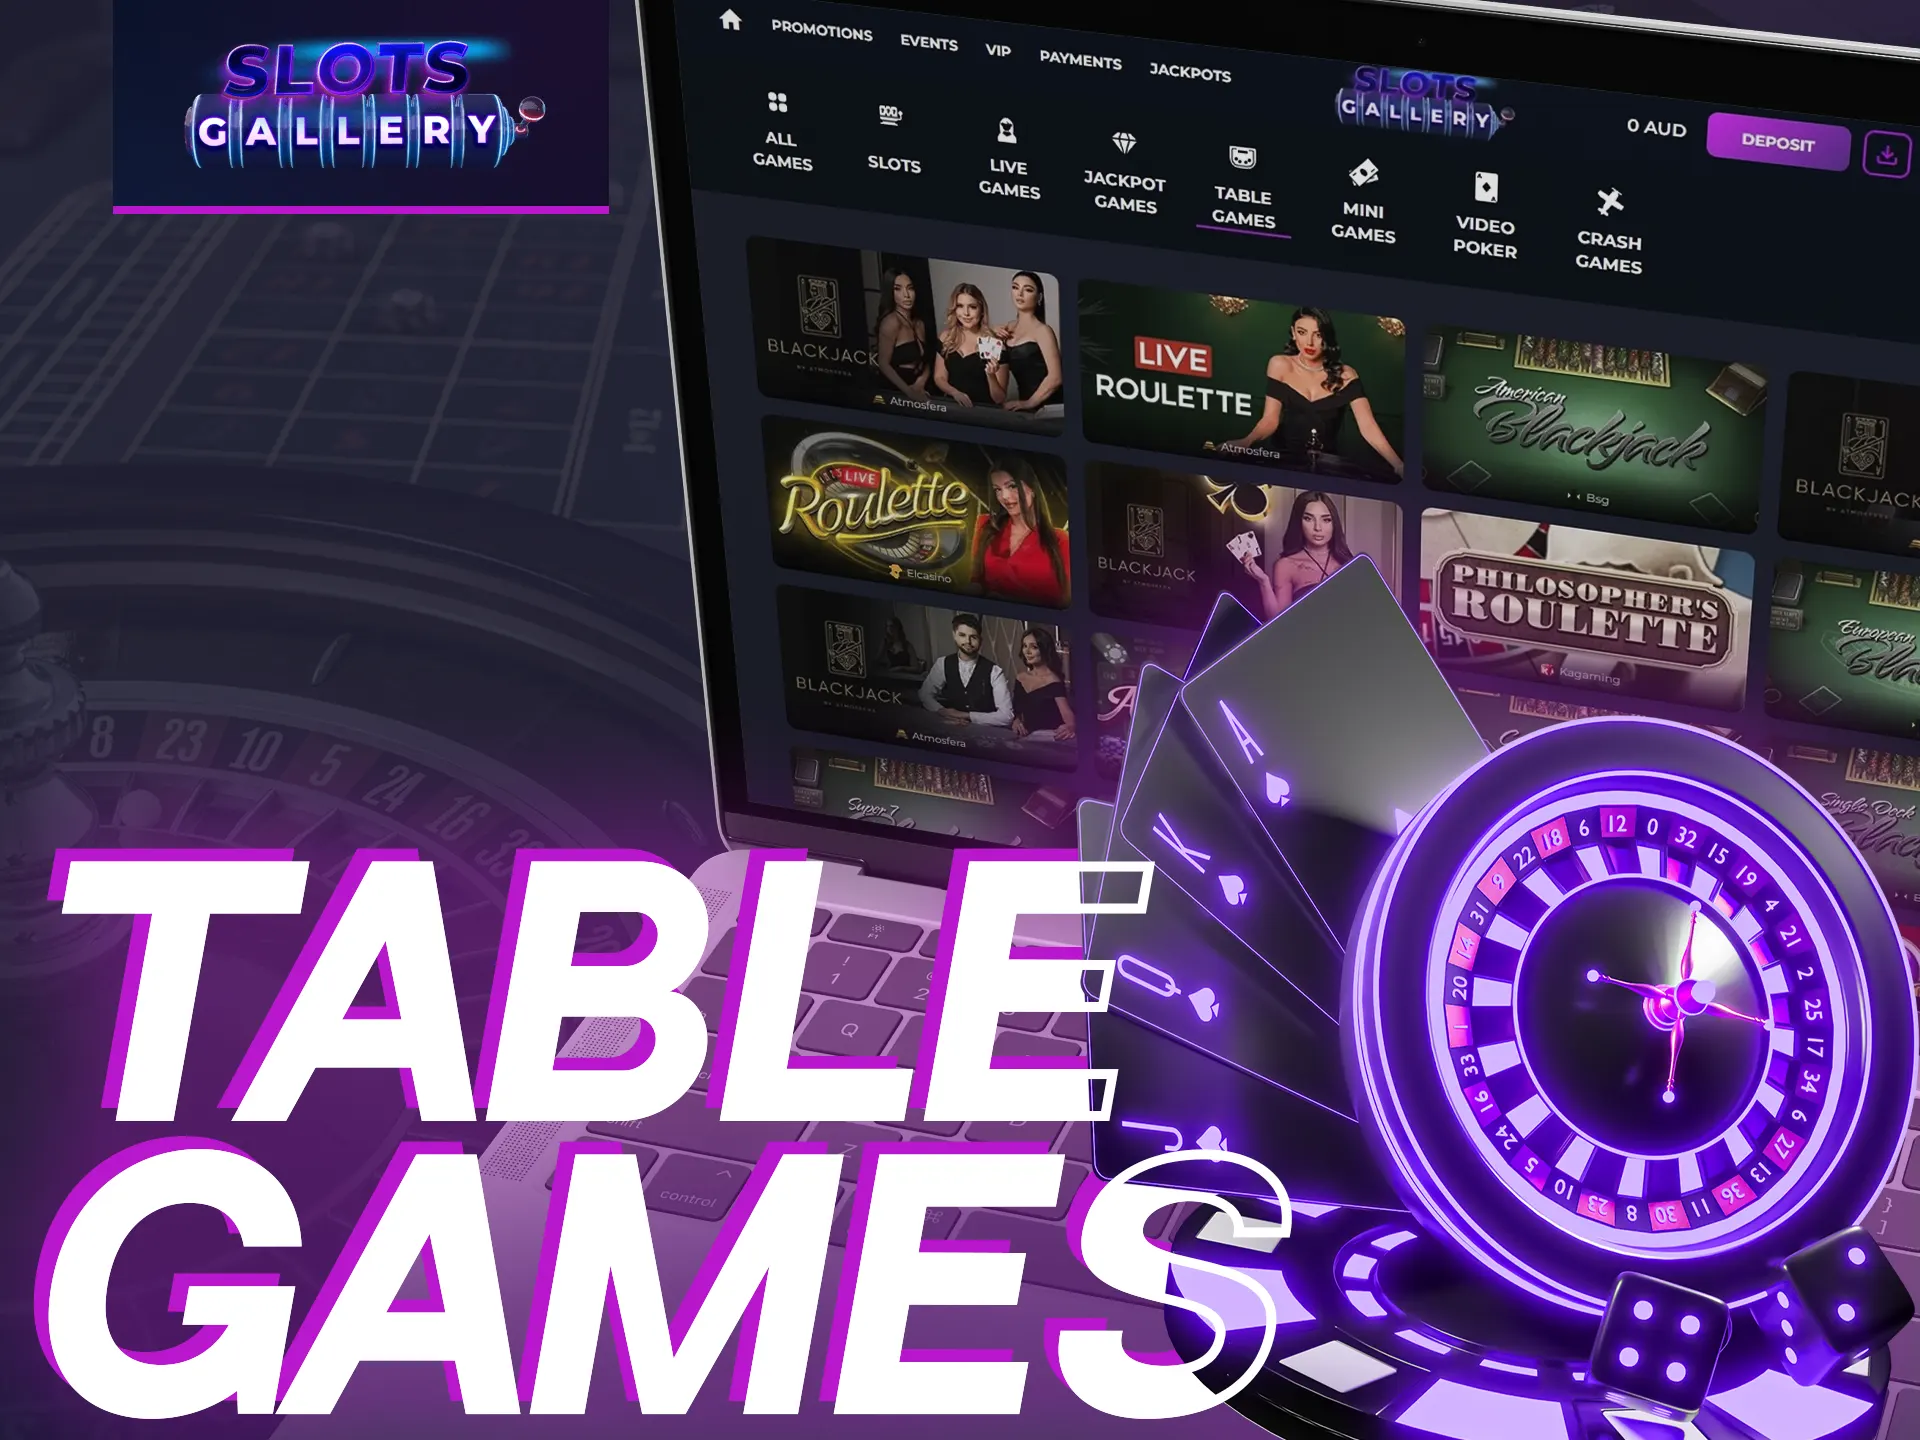 Play blackjack, roulette, and more in Slots Gallery's table games.